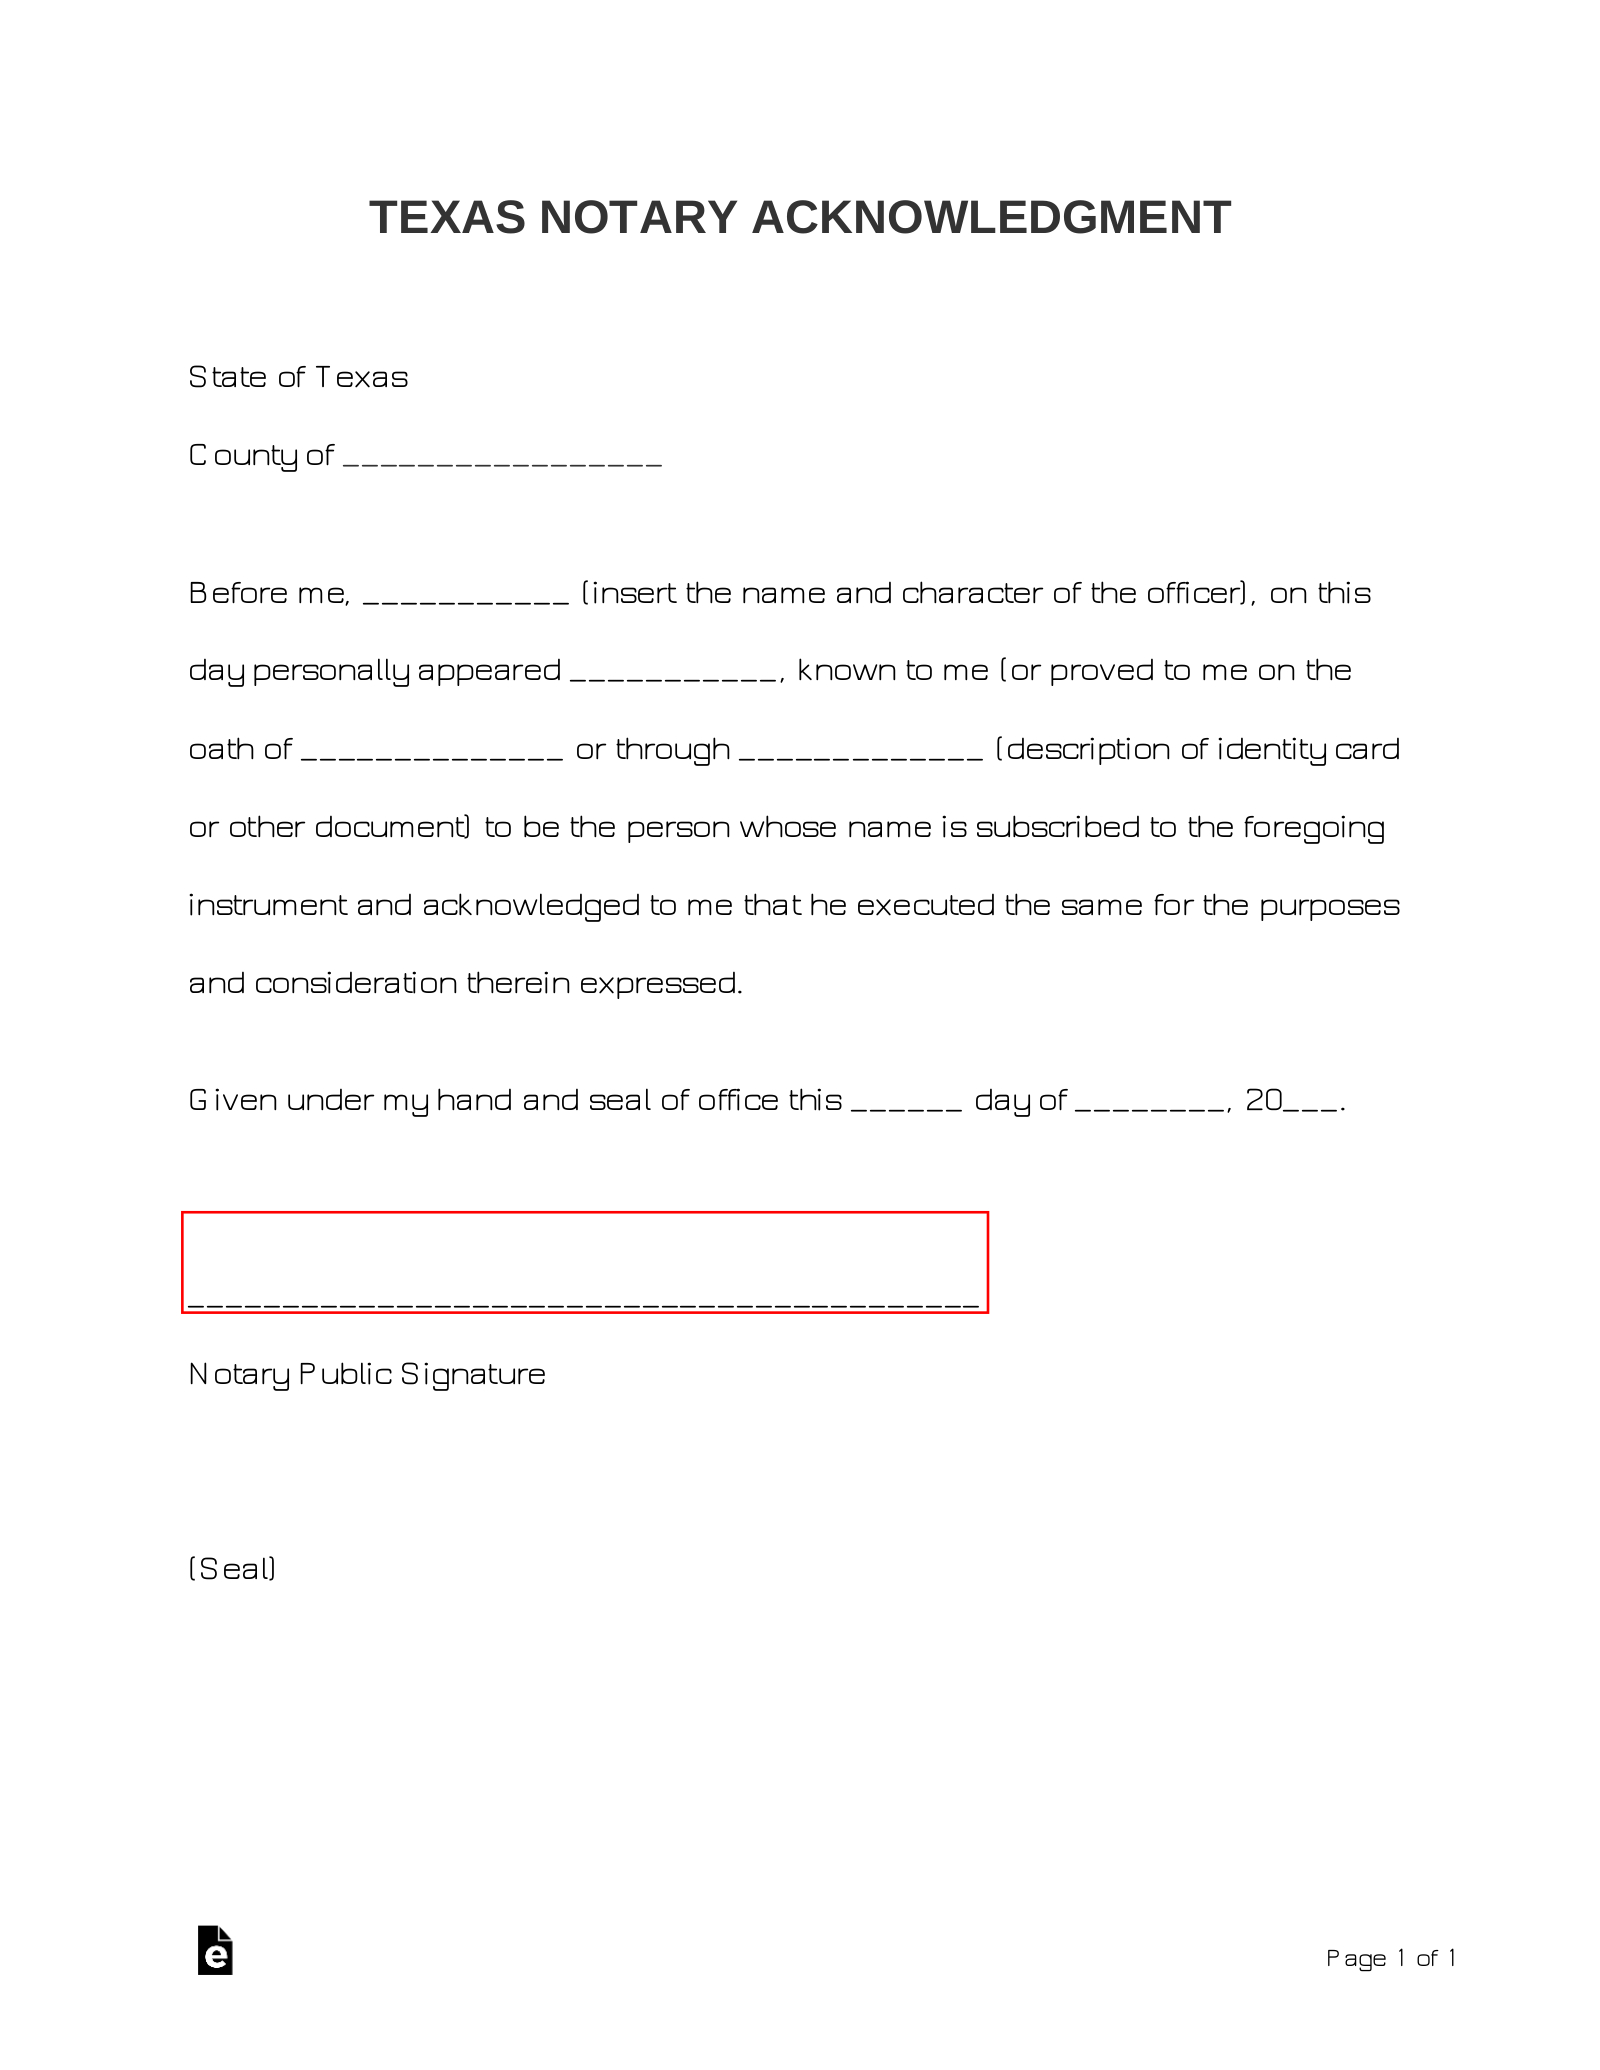 Printable Notary Forms Texas | Tutore - Master Of Documents intended for Notary Statement Template